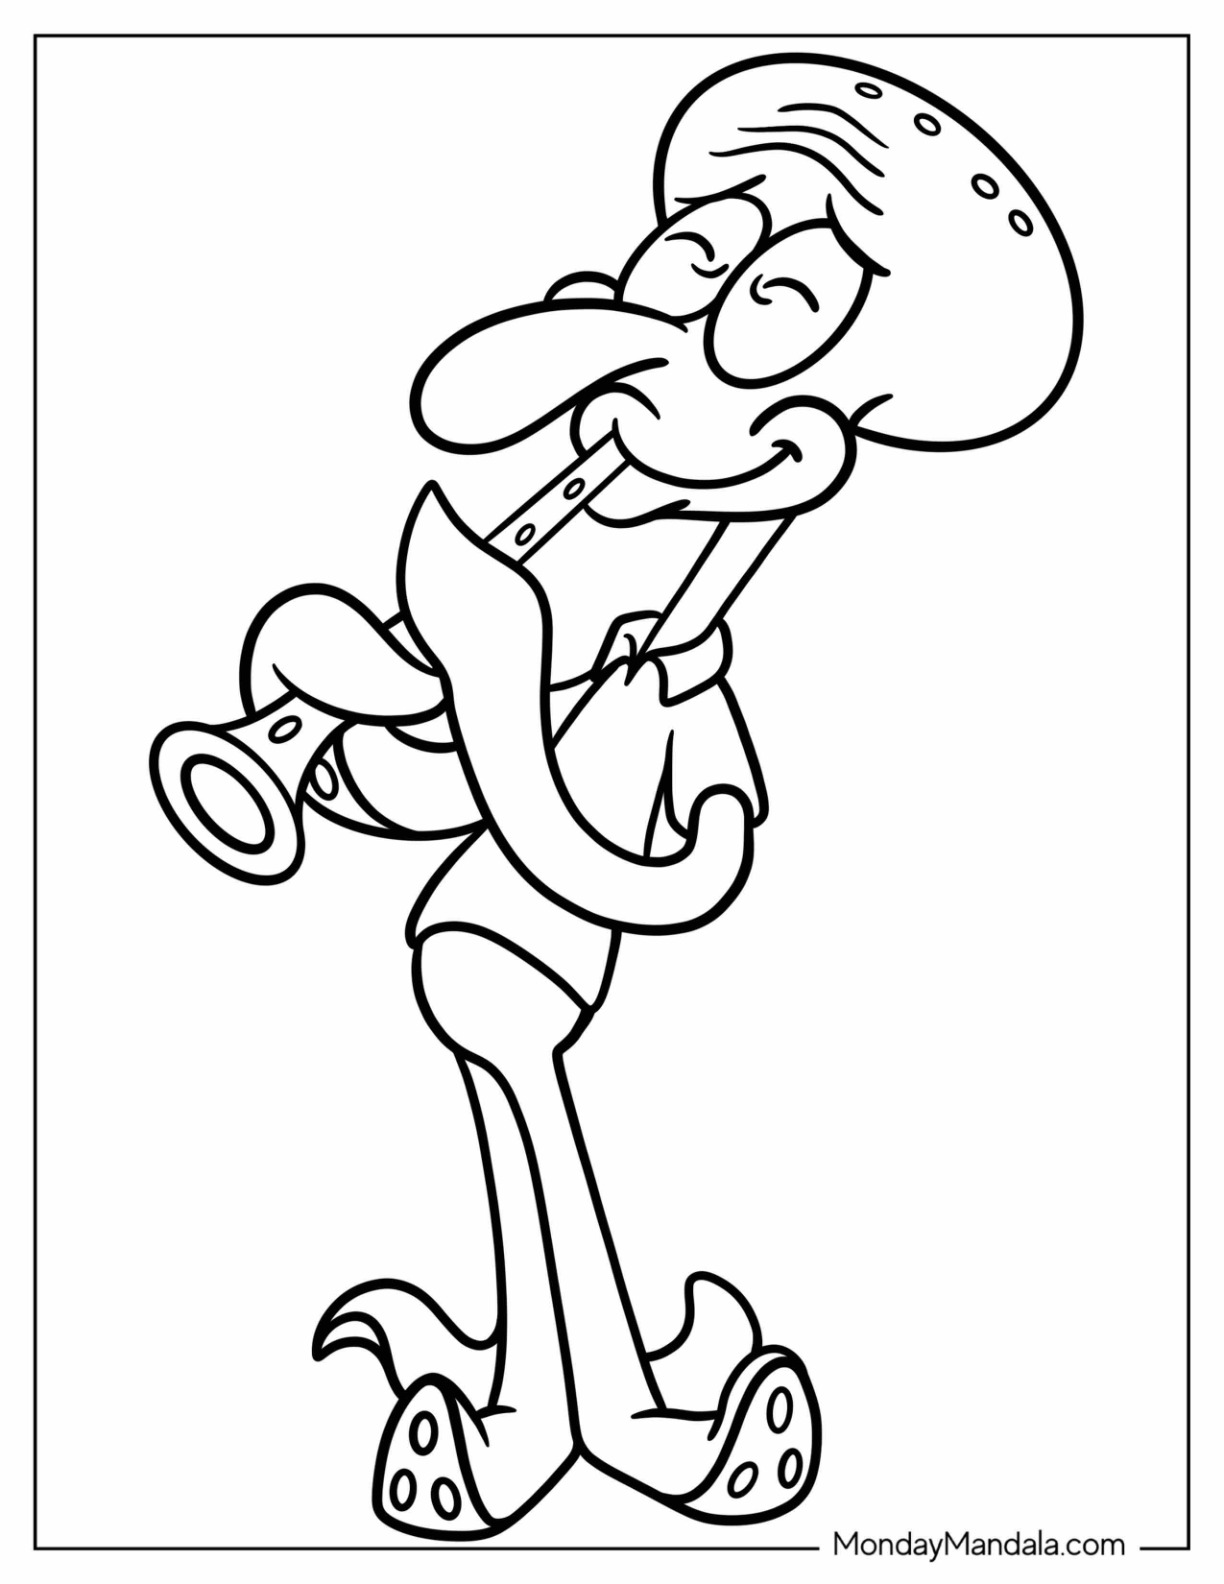 Squidward coloring pages free pdf printables